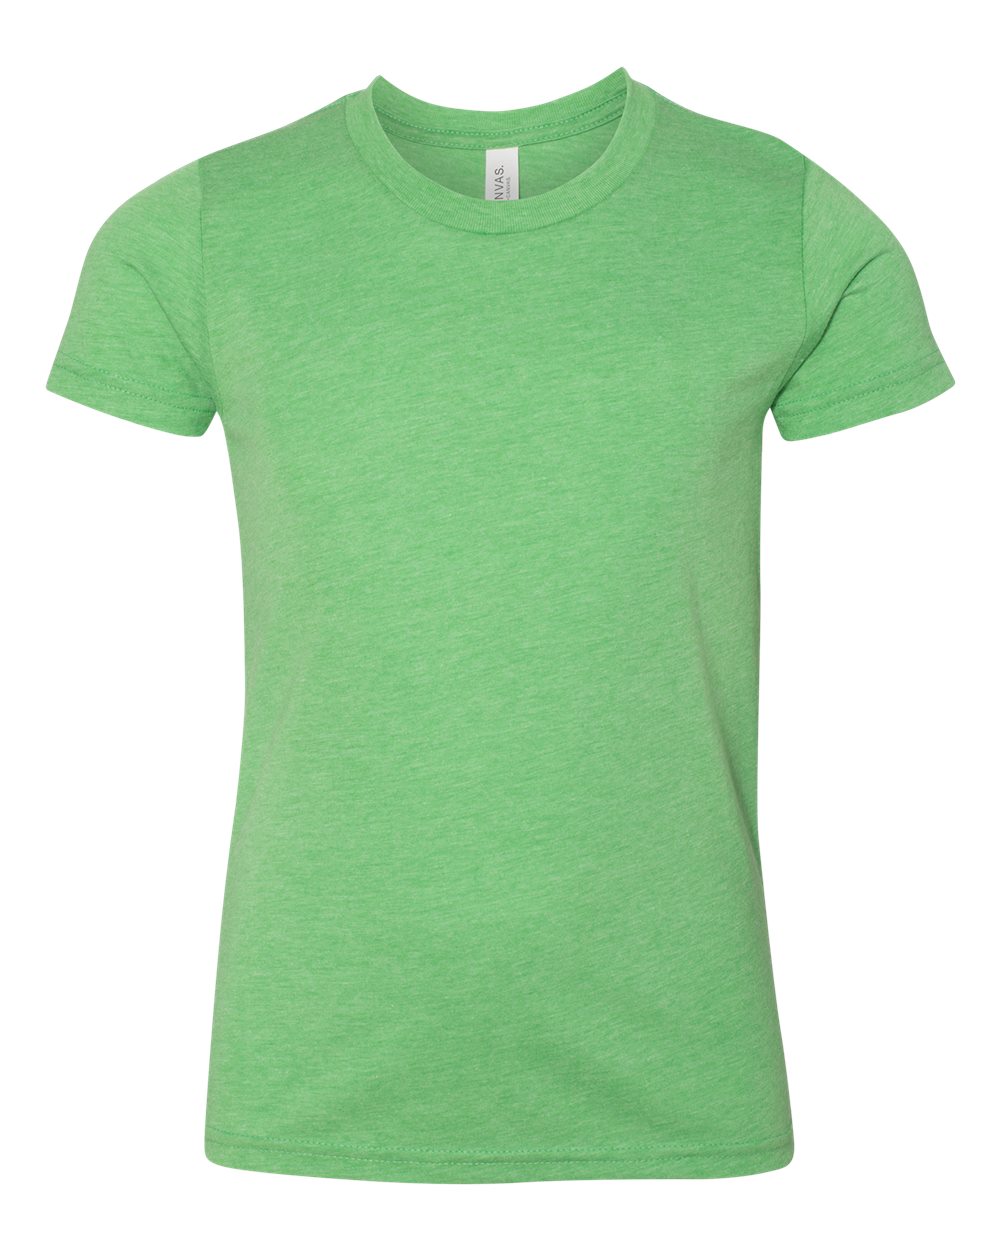 Bella + Canvas Youth Triblend Tee (3413y) in Green Triblend